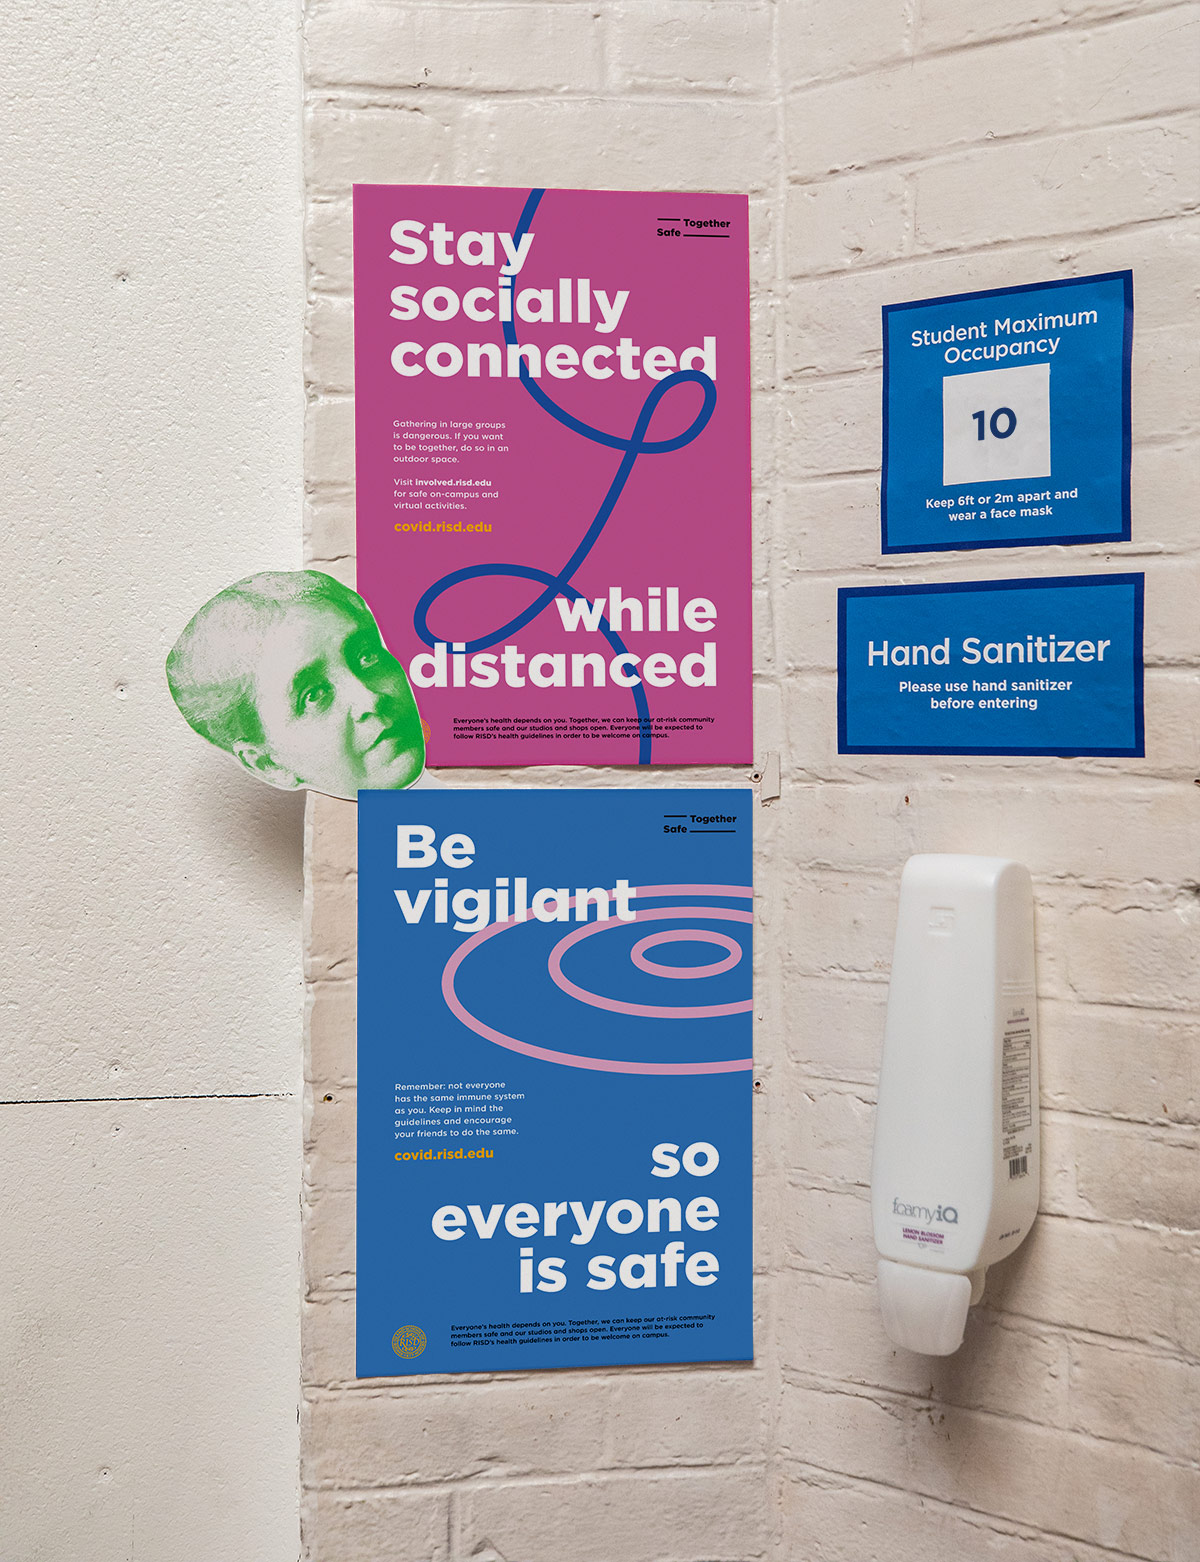 Wall with hand sanitizer, safety signs, and a pair of campaign posters